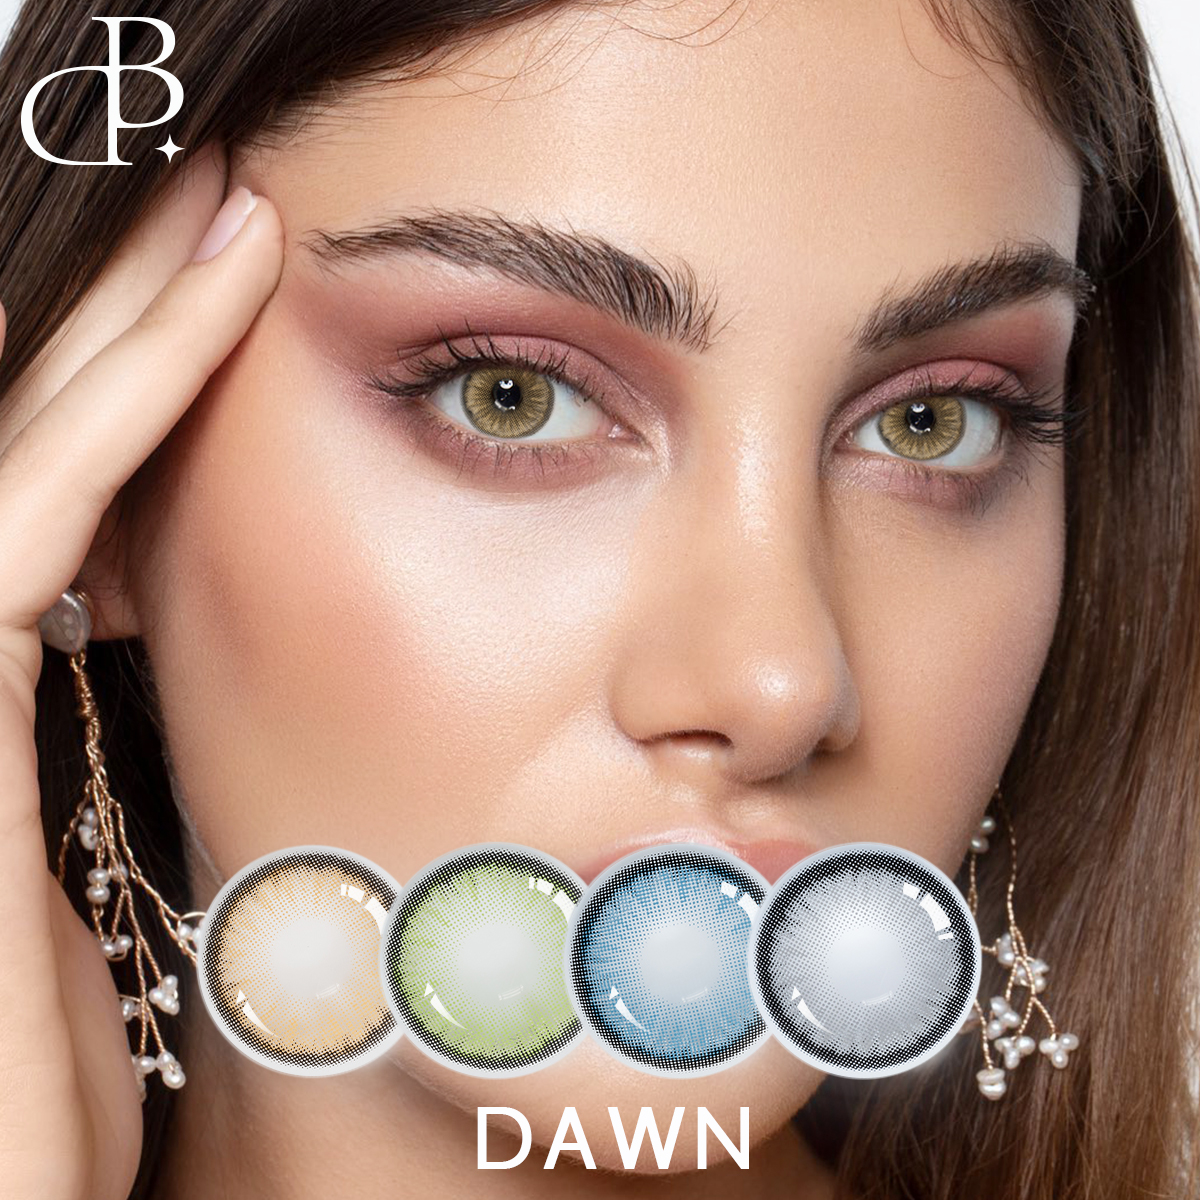 DAWN Custom Cosmetic Extra Lens အလှကုန် Soft Contacts Big Eye Colored Contact Lenses